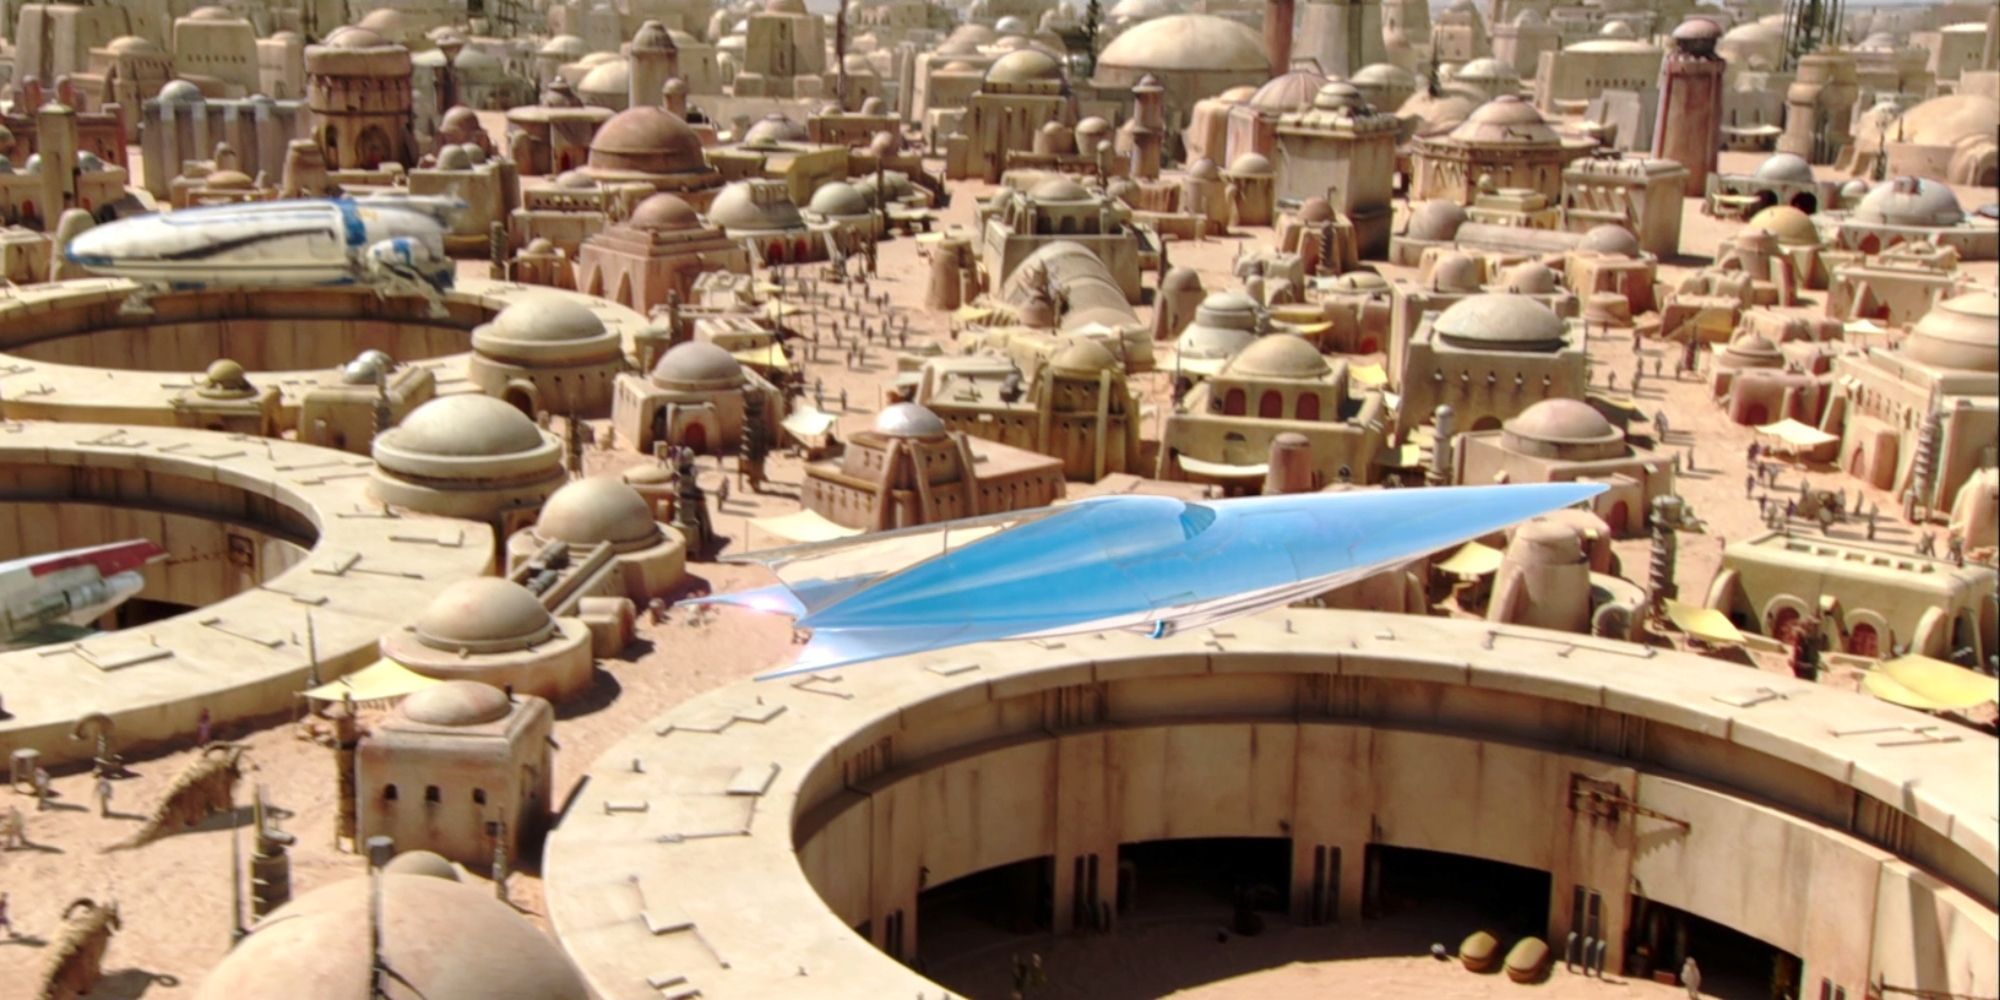 An image of Mos Espa, a location in Star Wars. 